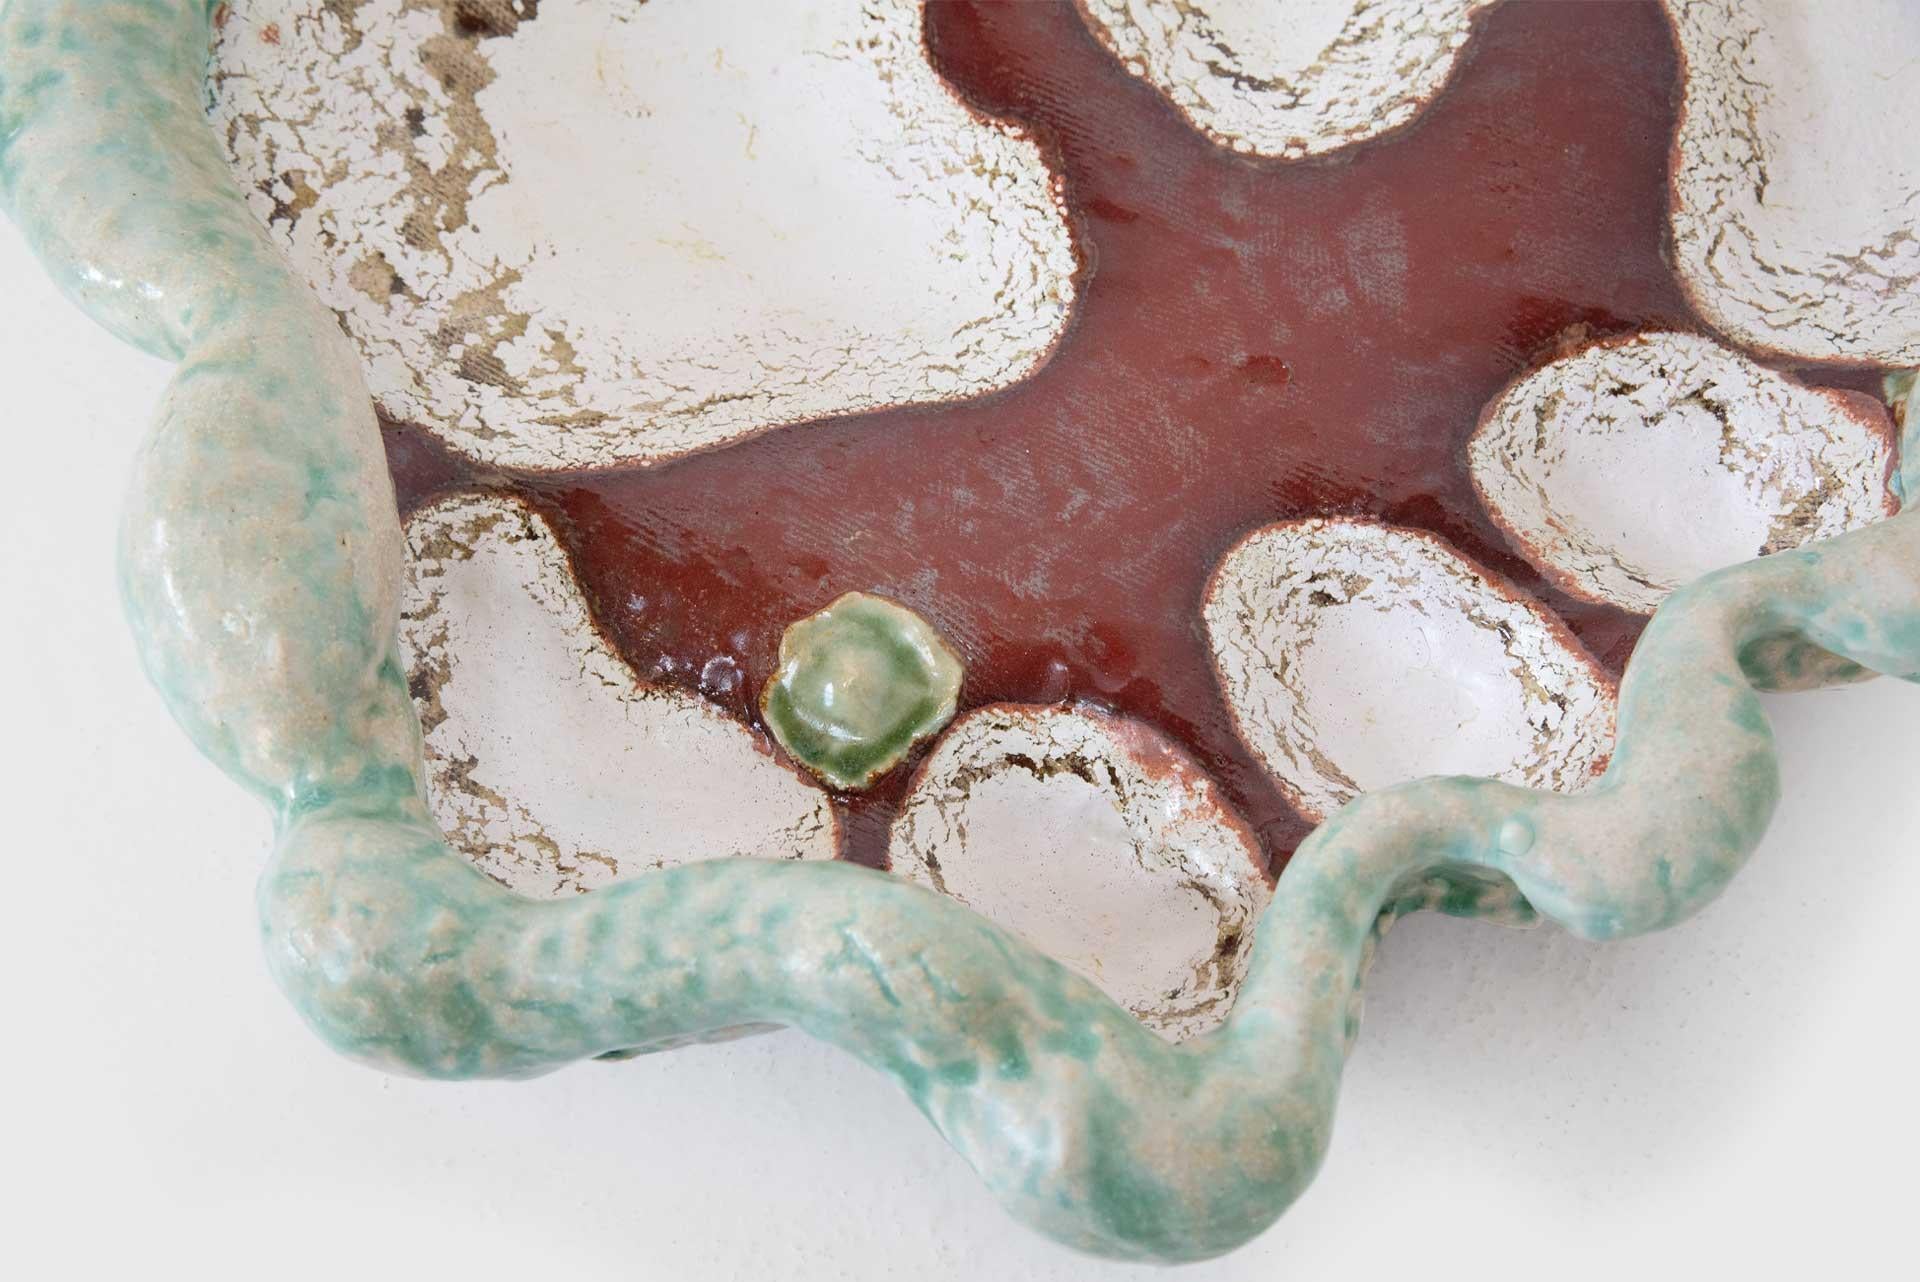 Glazed Multicolored Tray Model “Party Platter” by Nick Weddell Stoneware and Glaze Clay